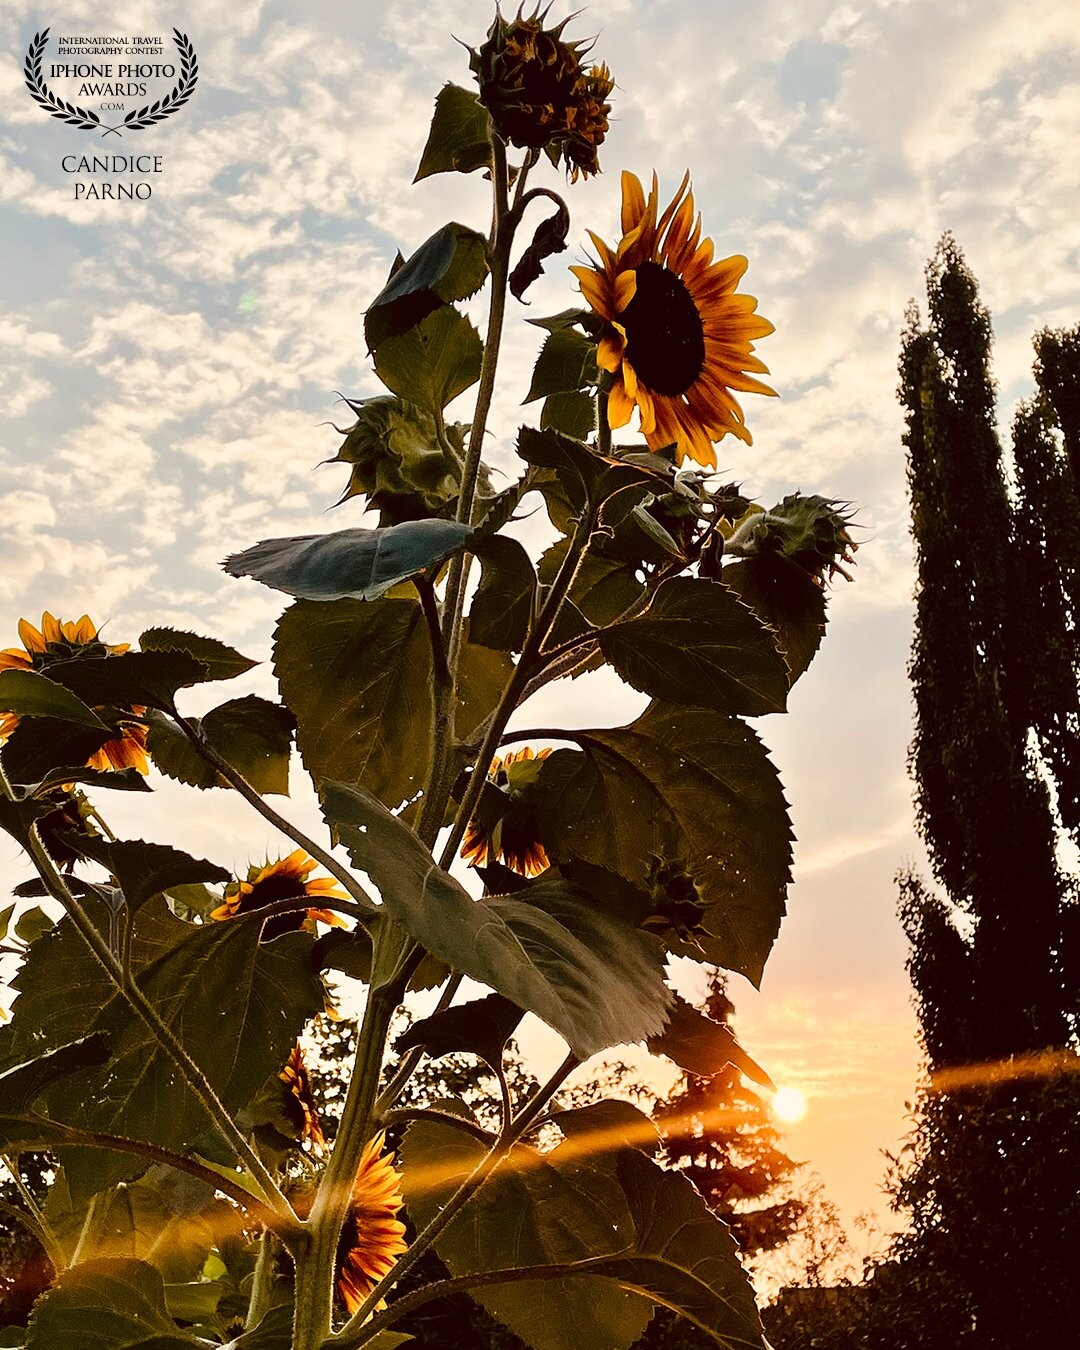 Sunflowers are my happy flower…I can’t help but smile when I see one.   And to capture it with the sunrise as well just made me giddy.